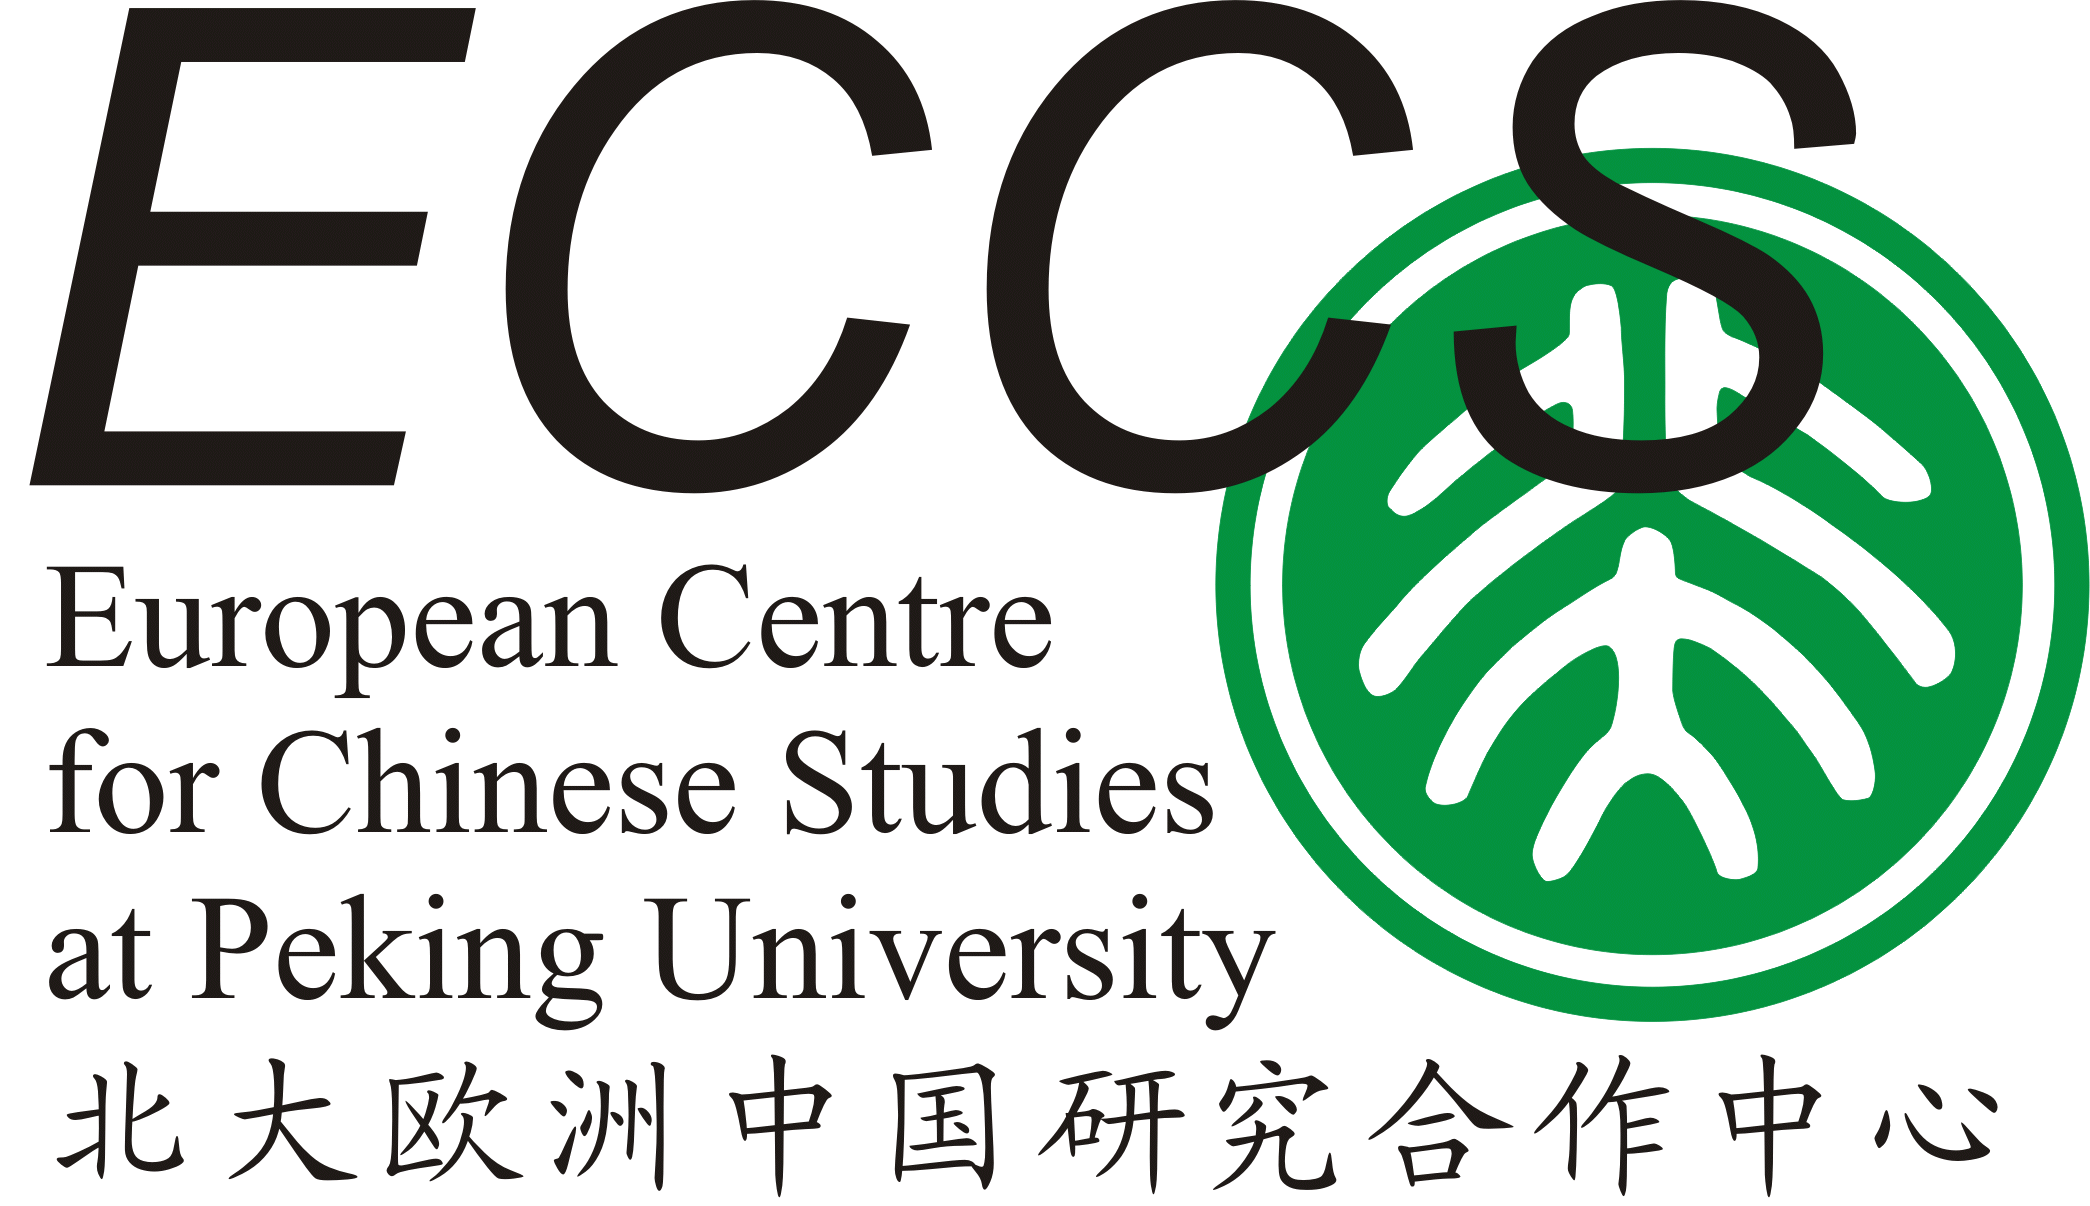 The European Centre for Chinese Studies